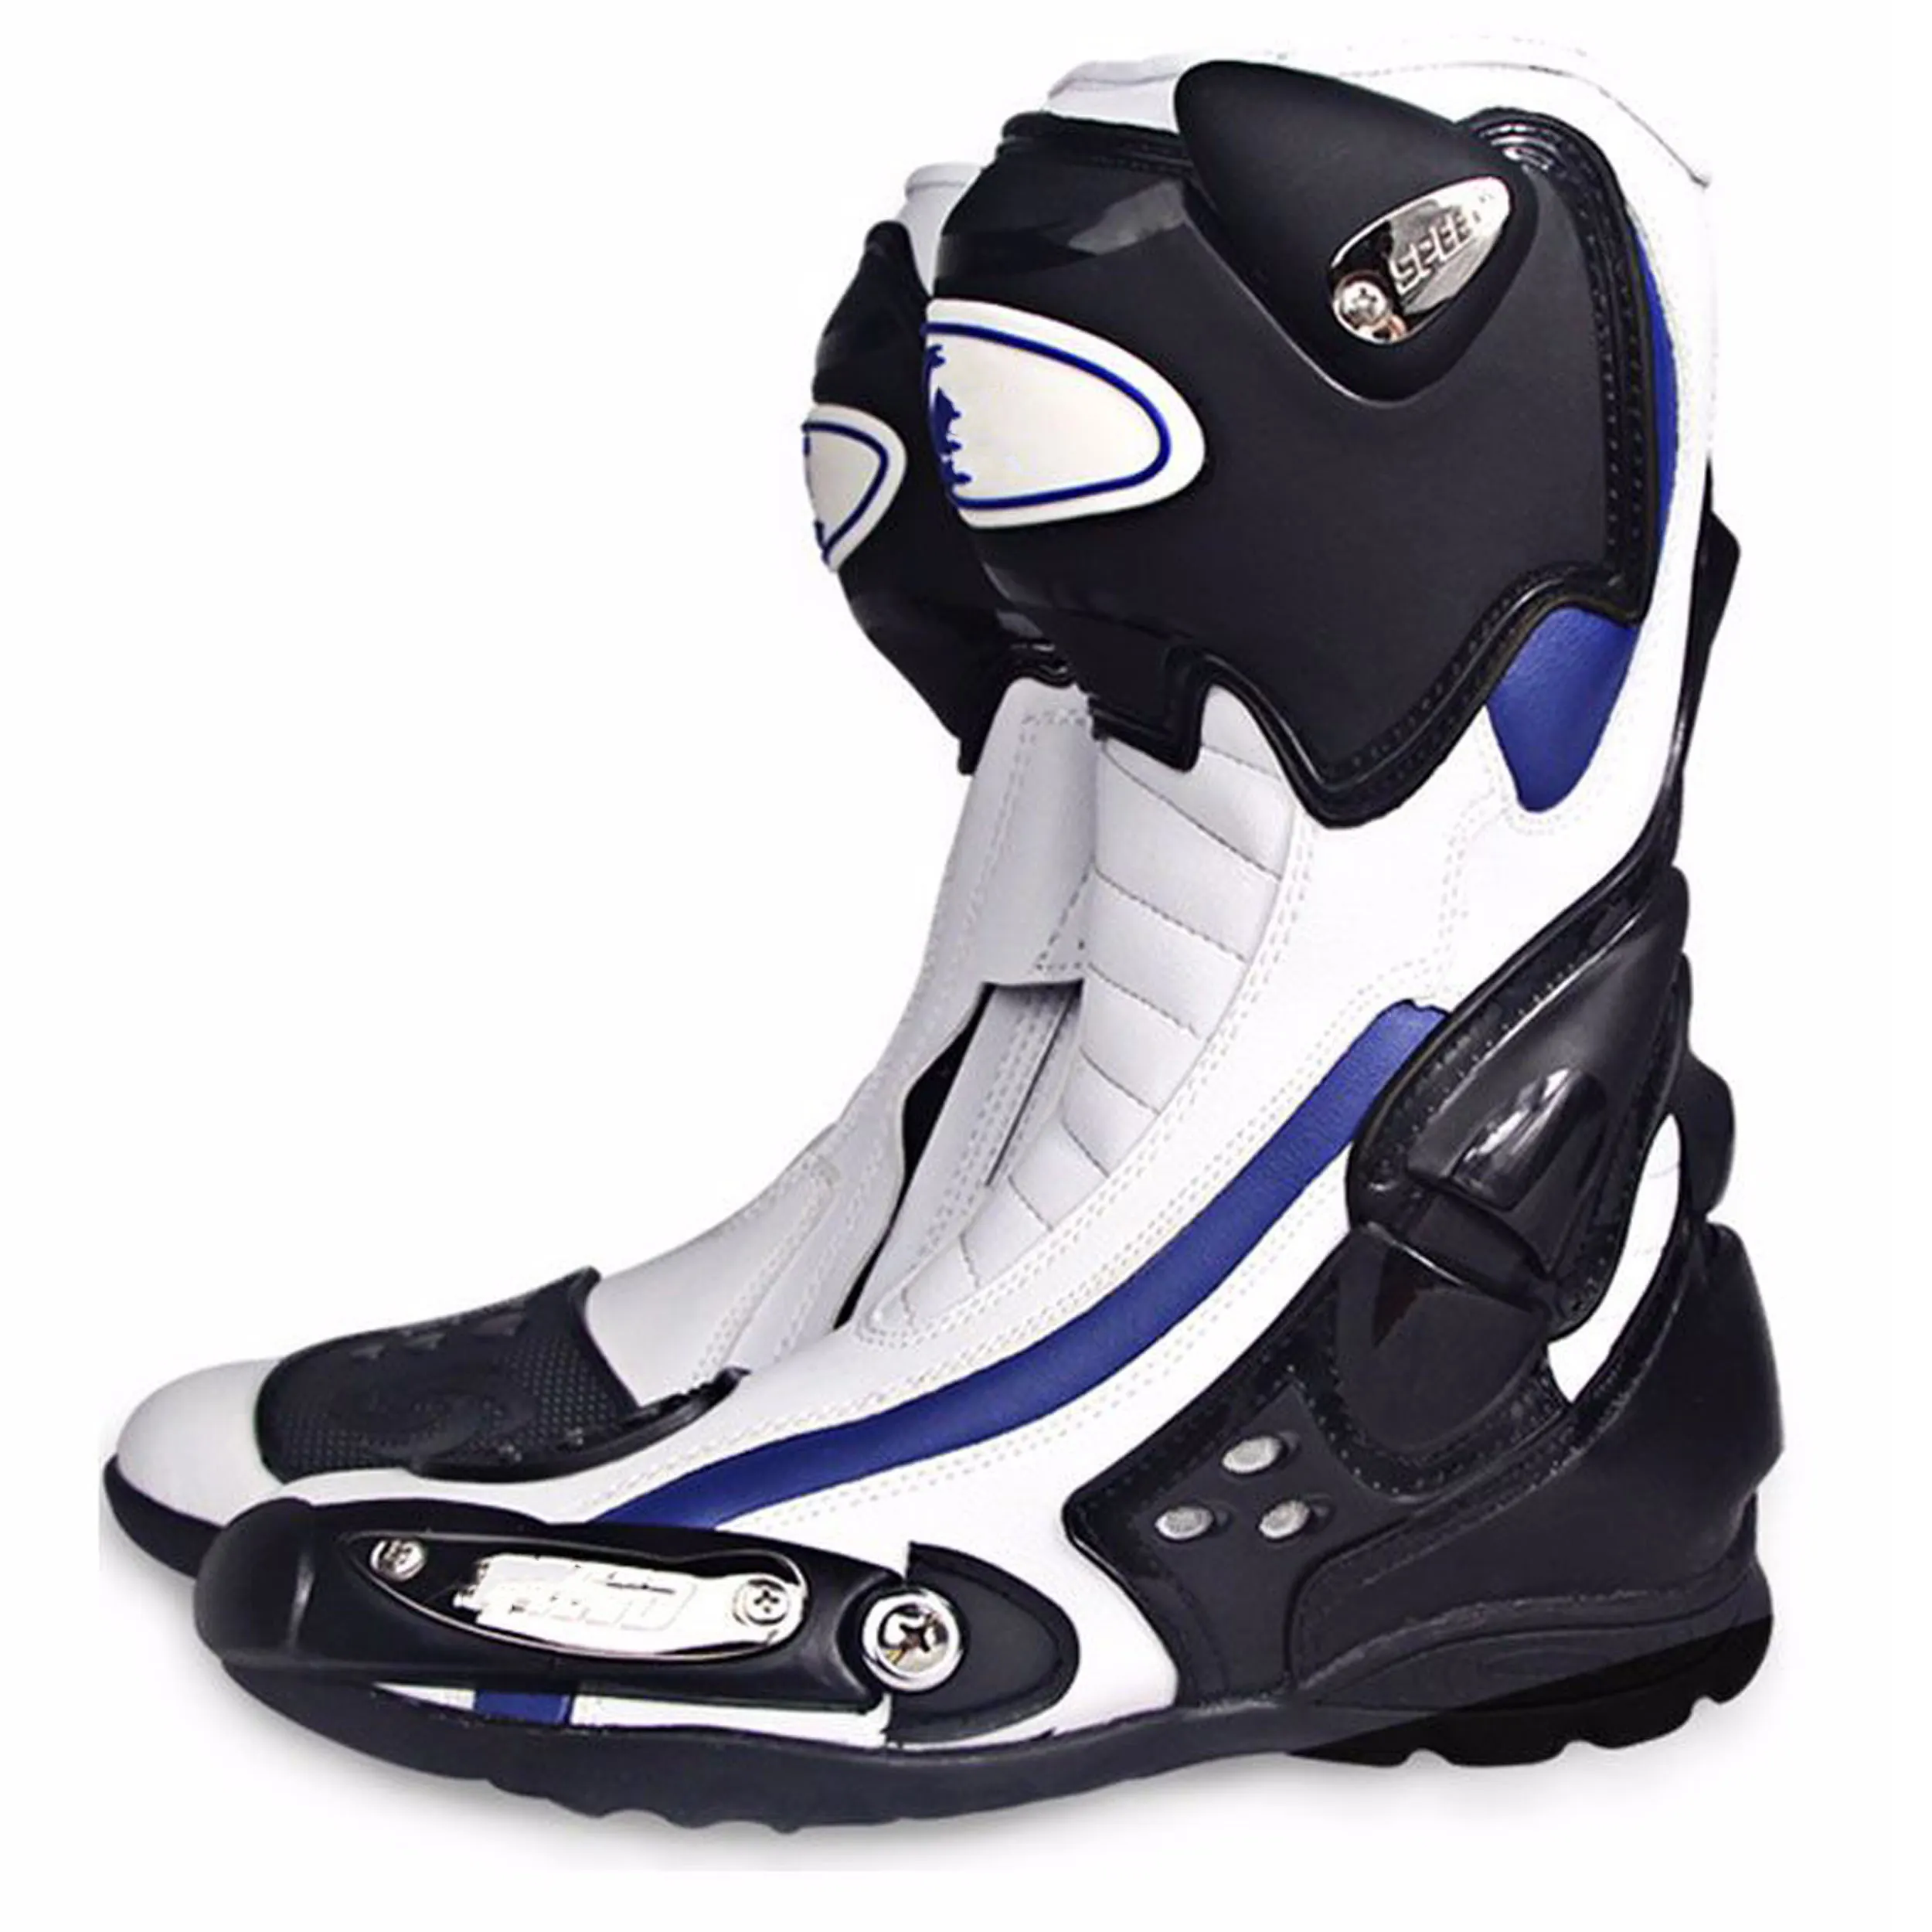 Top Quality Motorbike Leather Racing Shoes / Motorcycle Riding Boots for sale in wholesale price